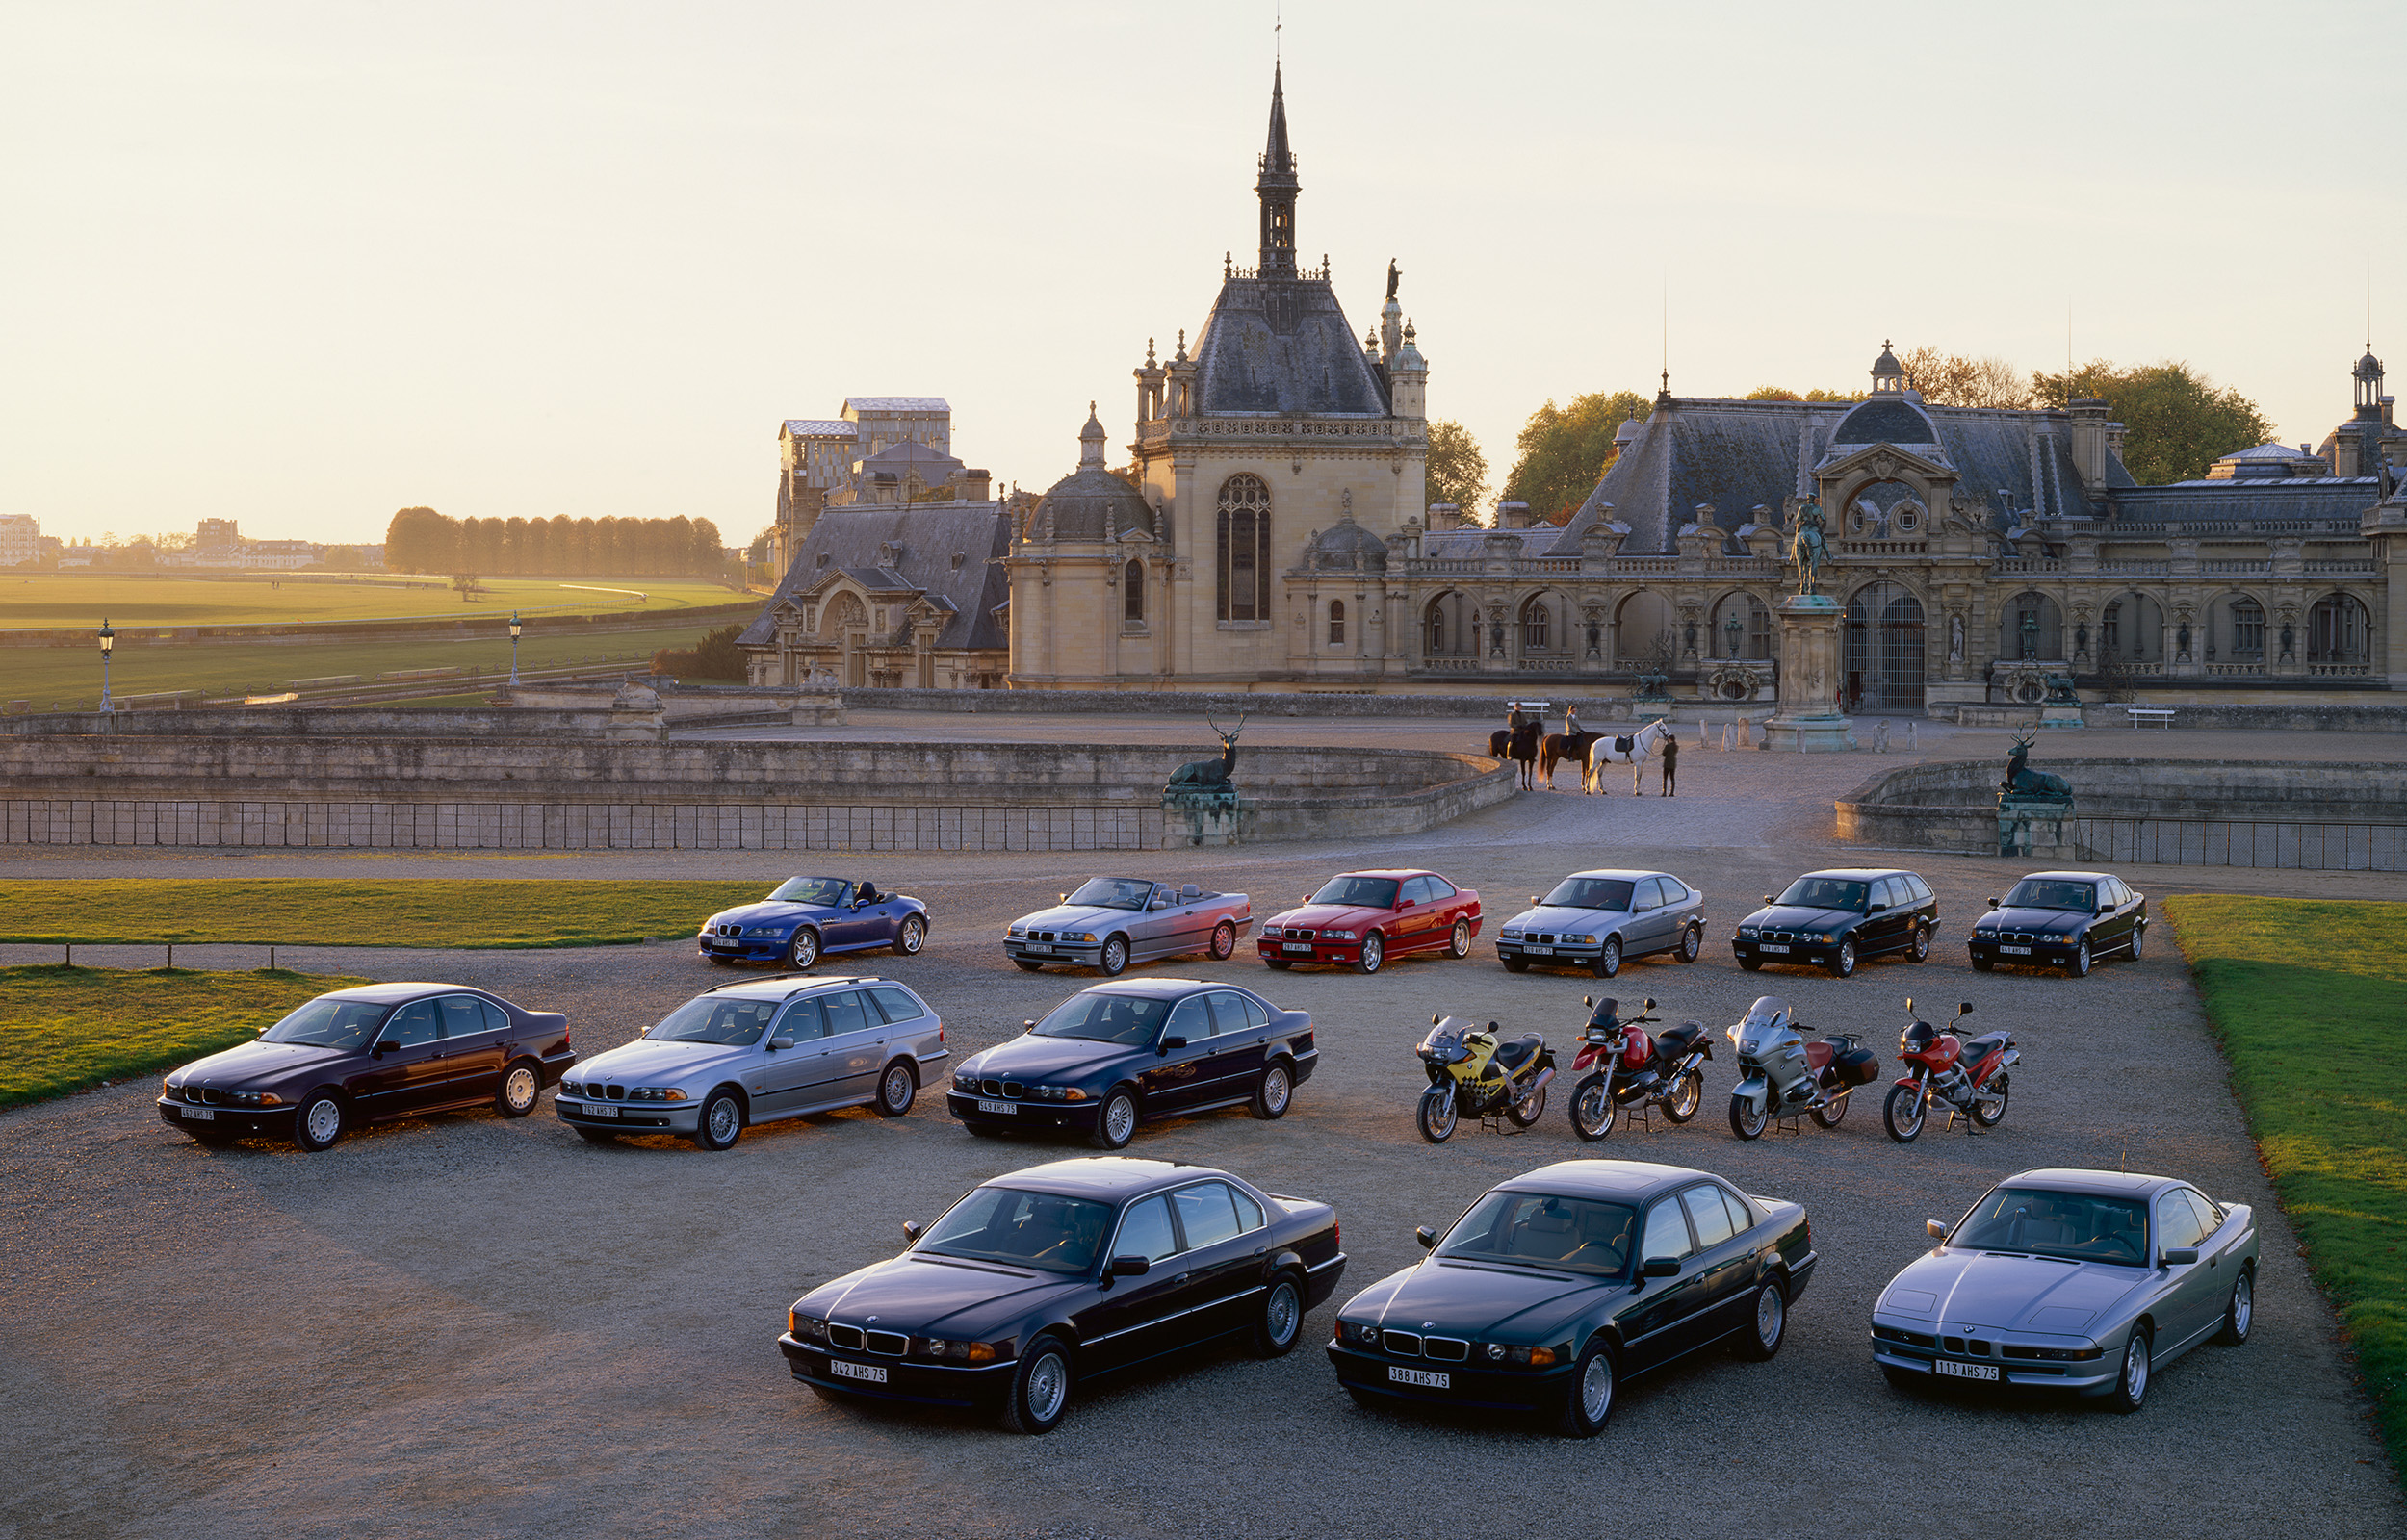  BMW Cars at Chantilly  BMW Annual Report 1997 